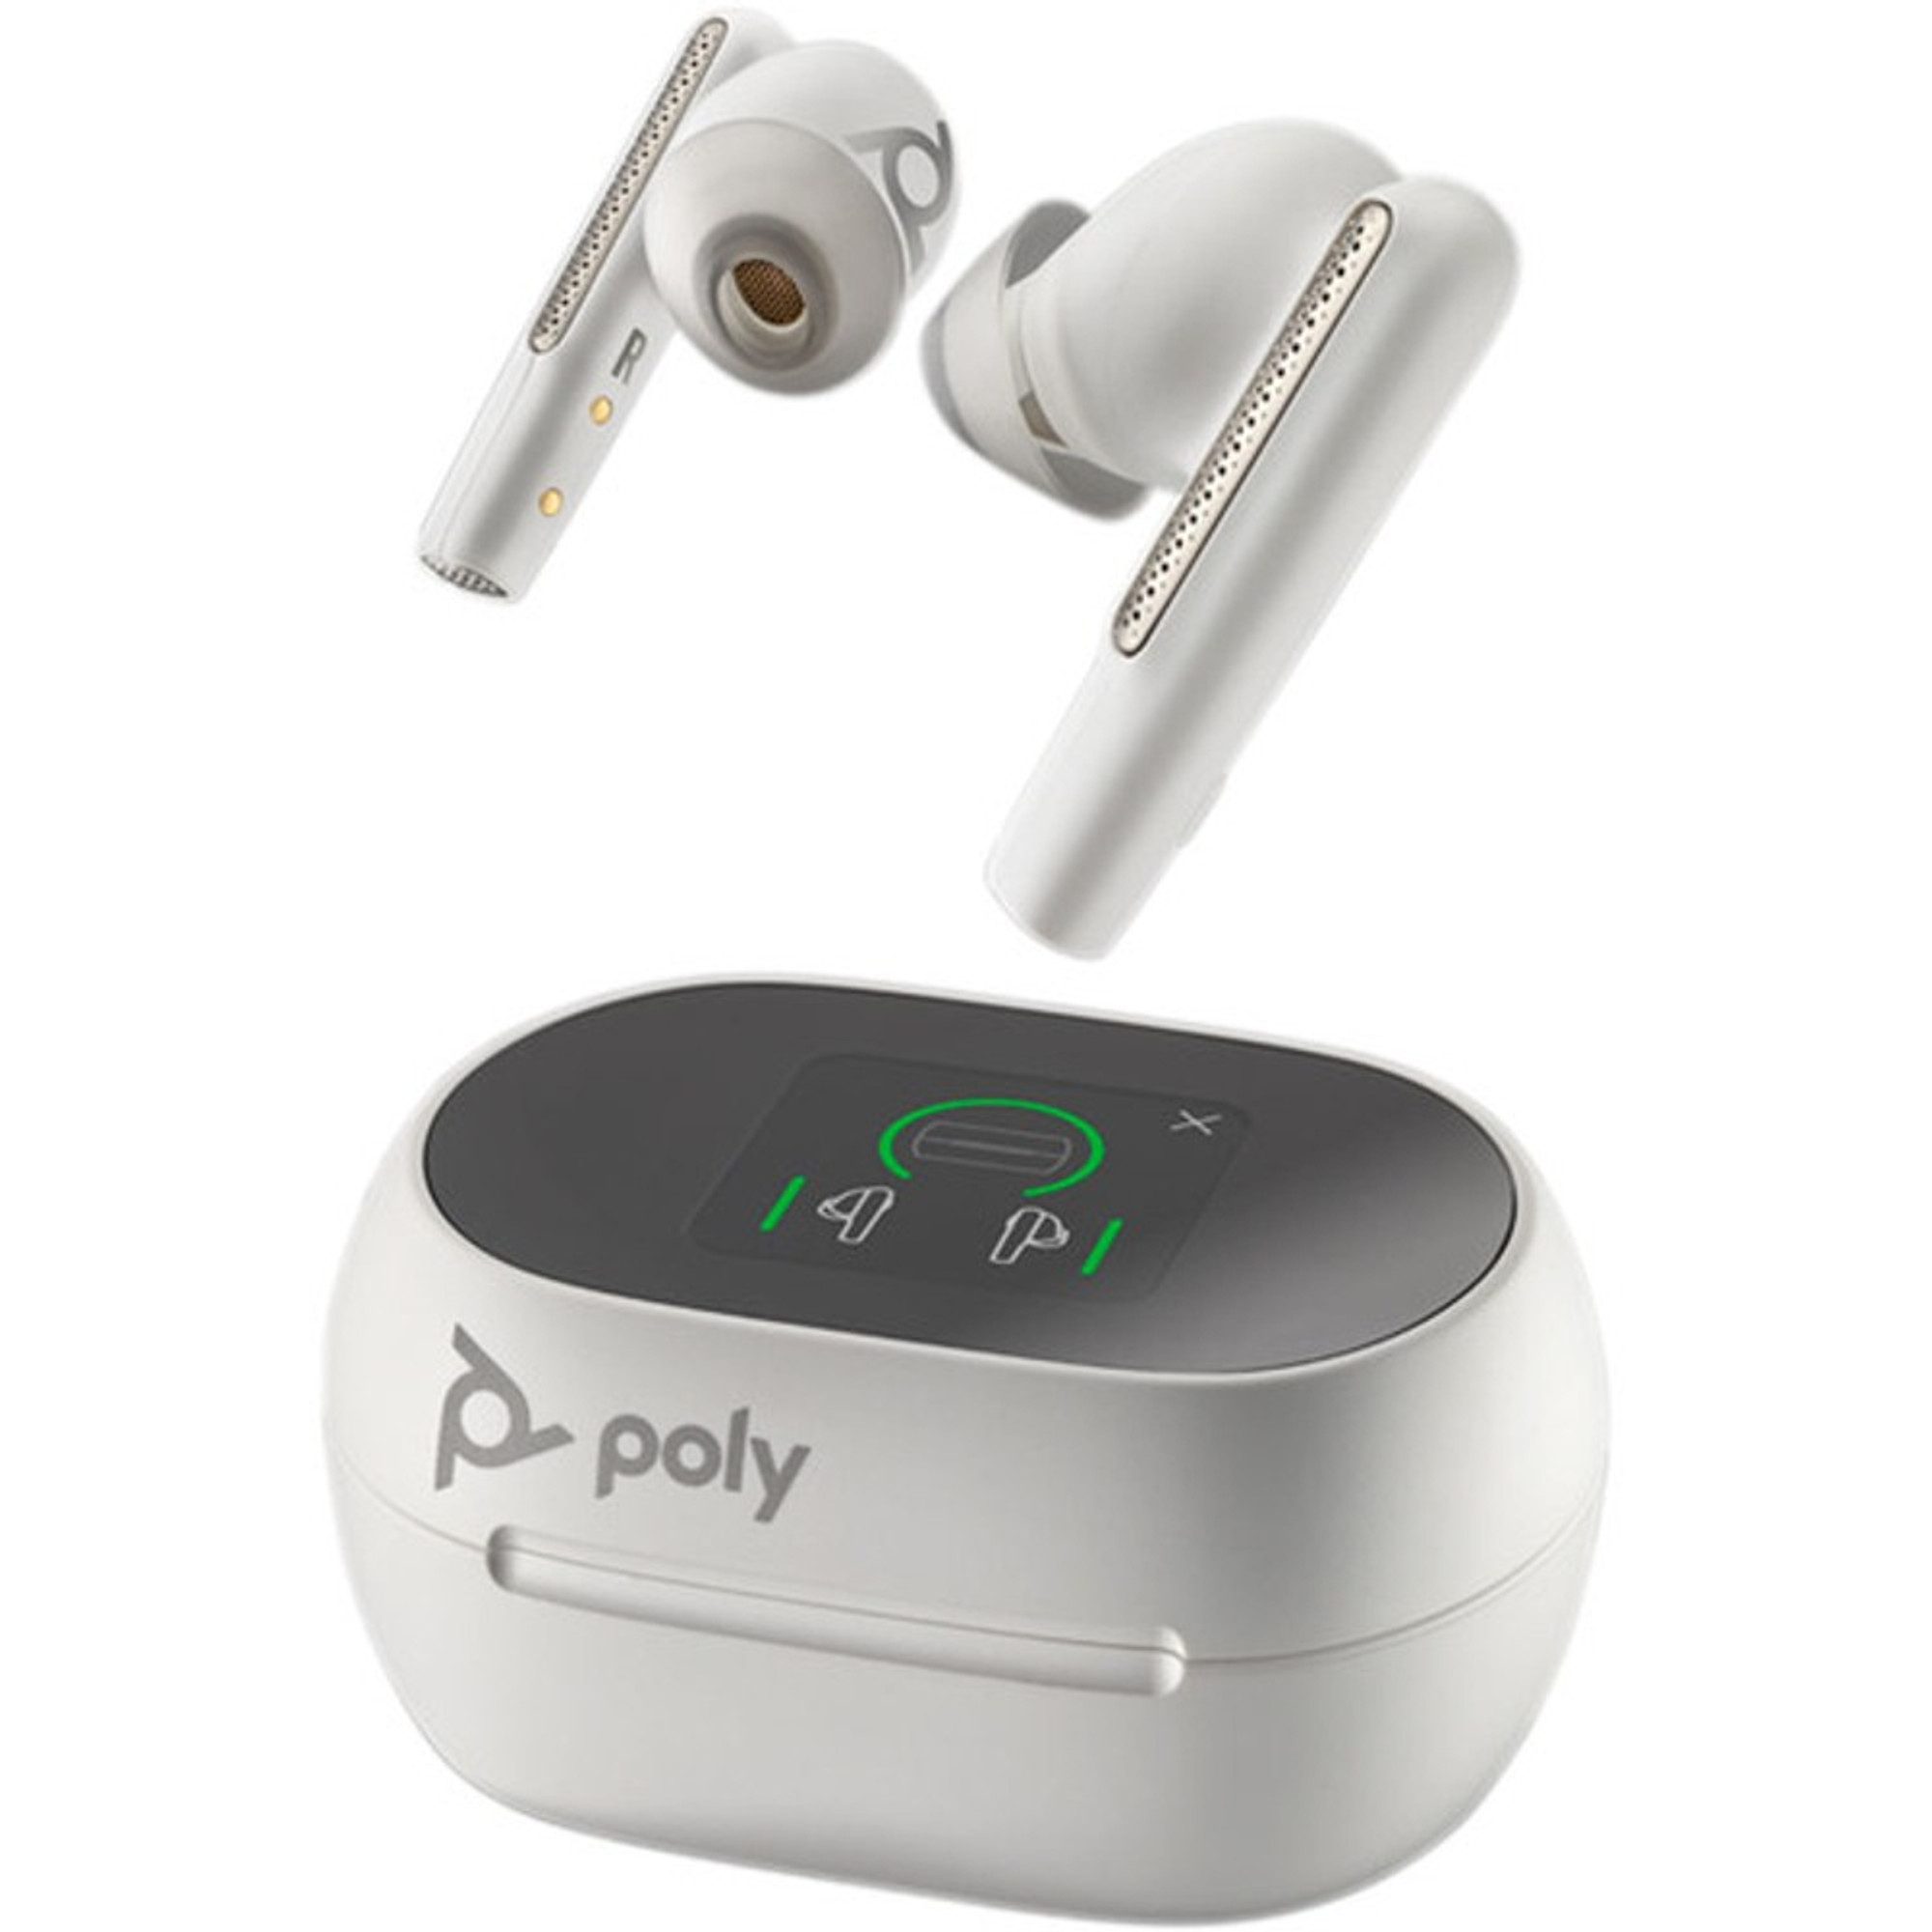 Poly Plantronics Poly | Voyager (White) 60+ Earbuds HEADPHONES (216754-01 Plantronics True Plantronics 7Y8G5AA) USB-A, Case | Headsets Singapore | 60+ Charging Poly With / UC | Free Poly Plantronics Free Voyager Touchscreen Wireless